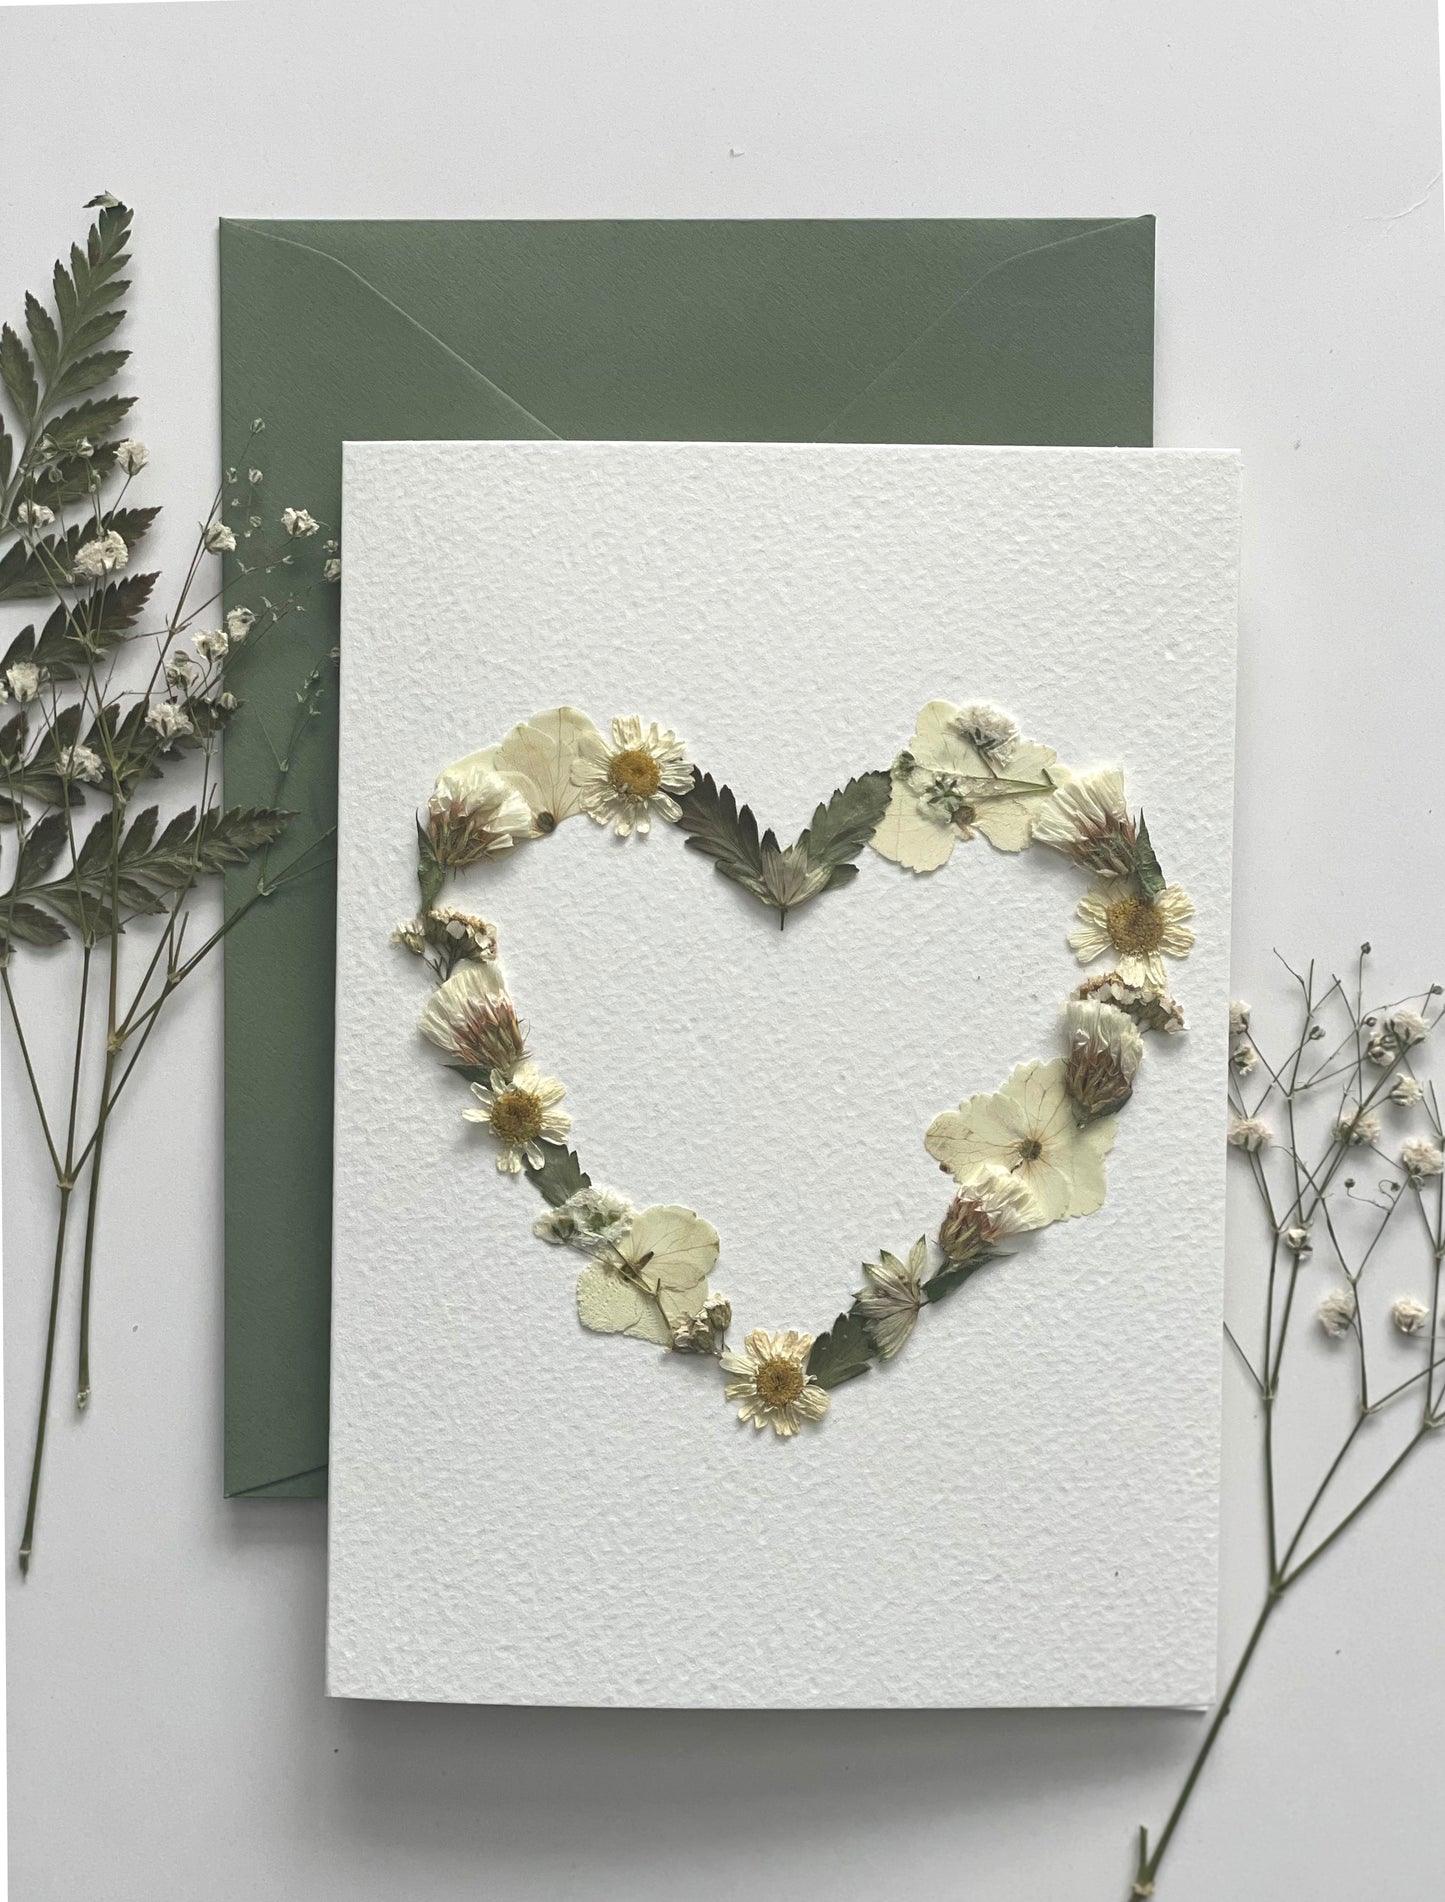 Flower Heart Cards - Real Pressed Flowers